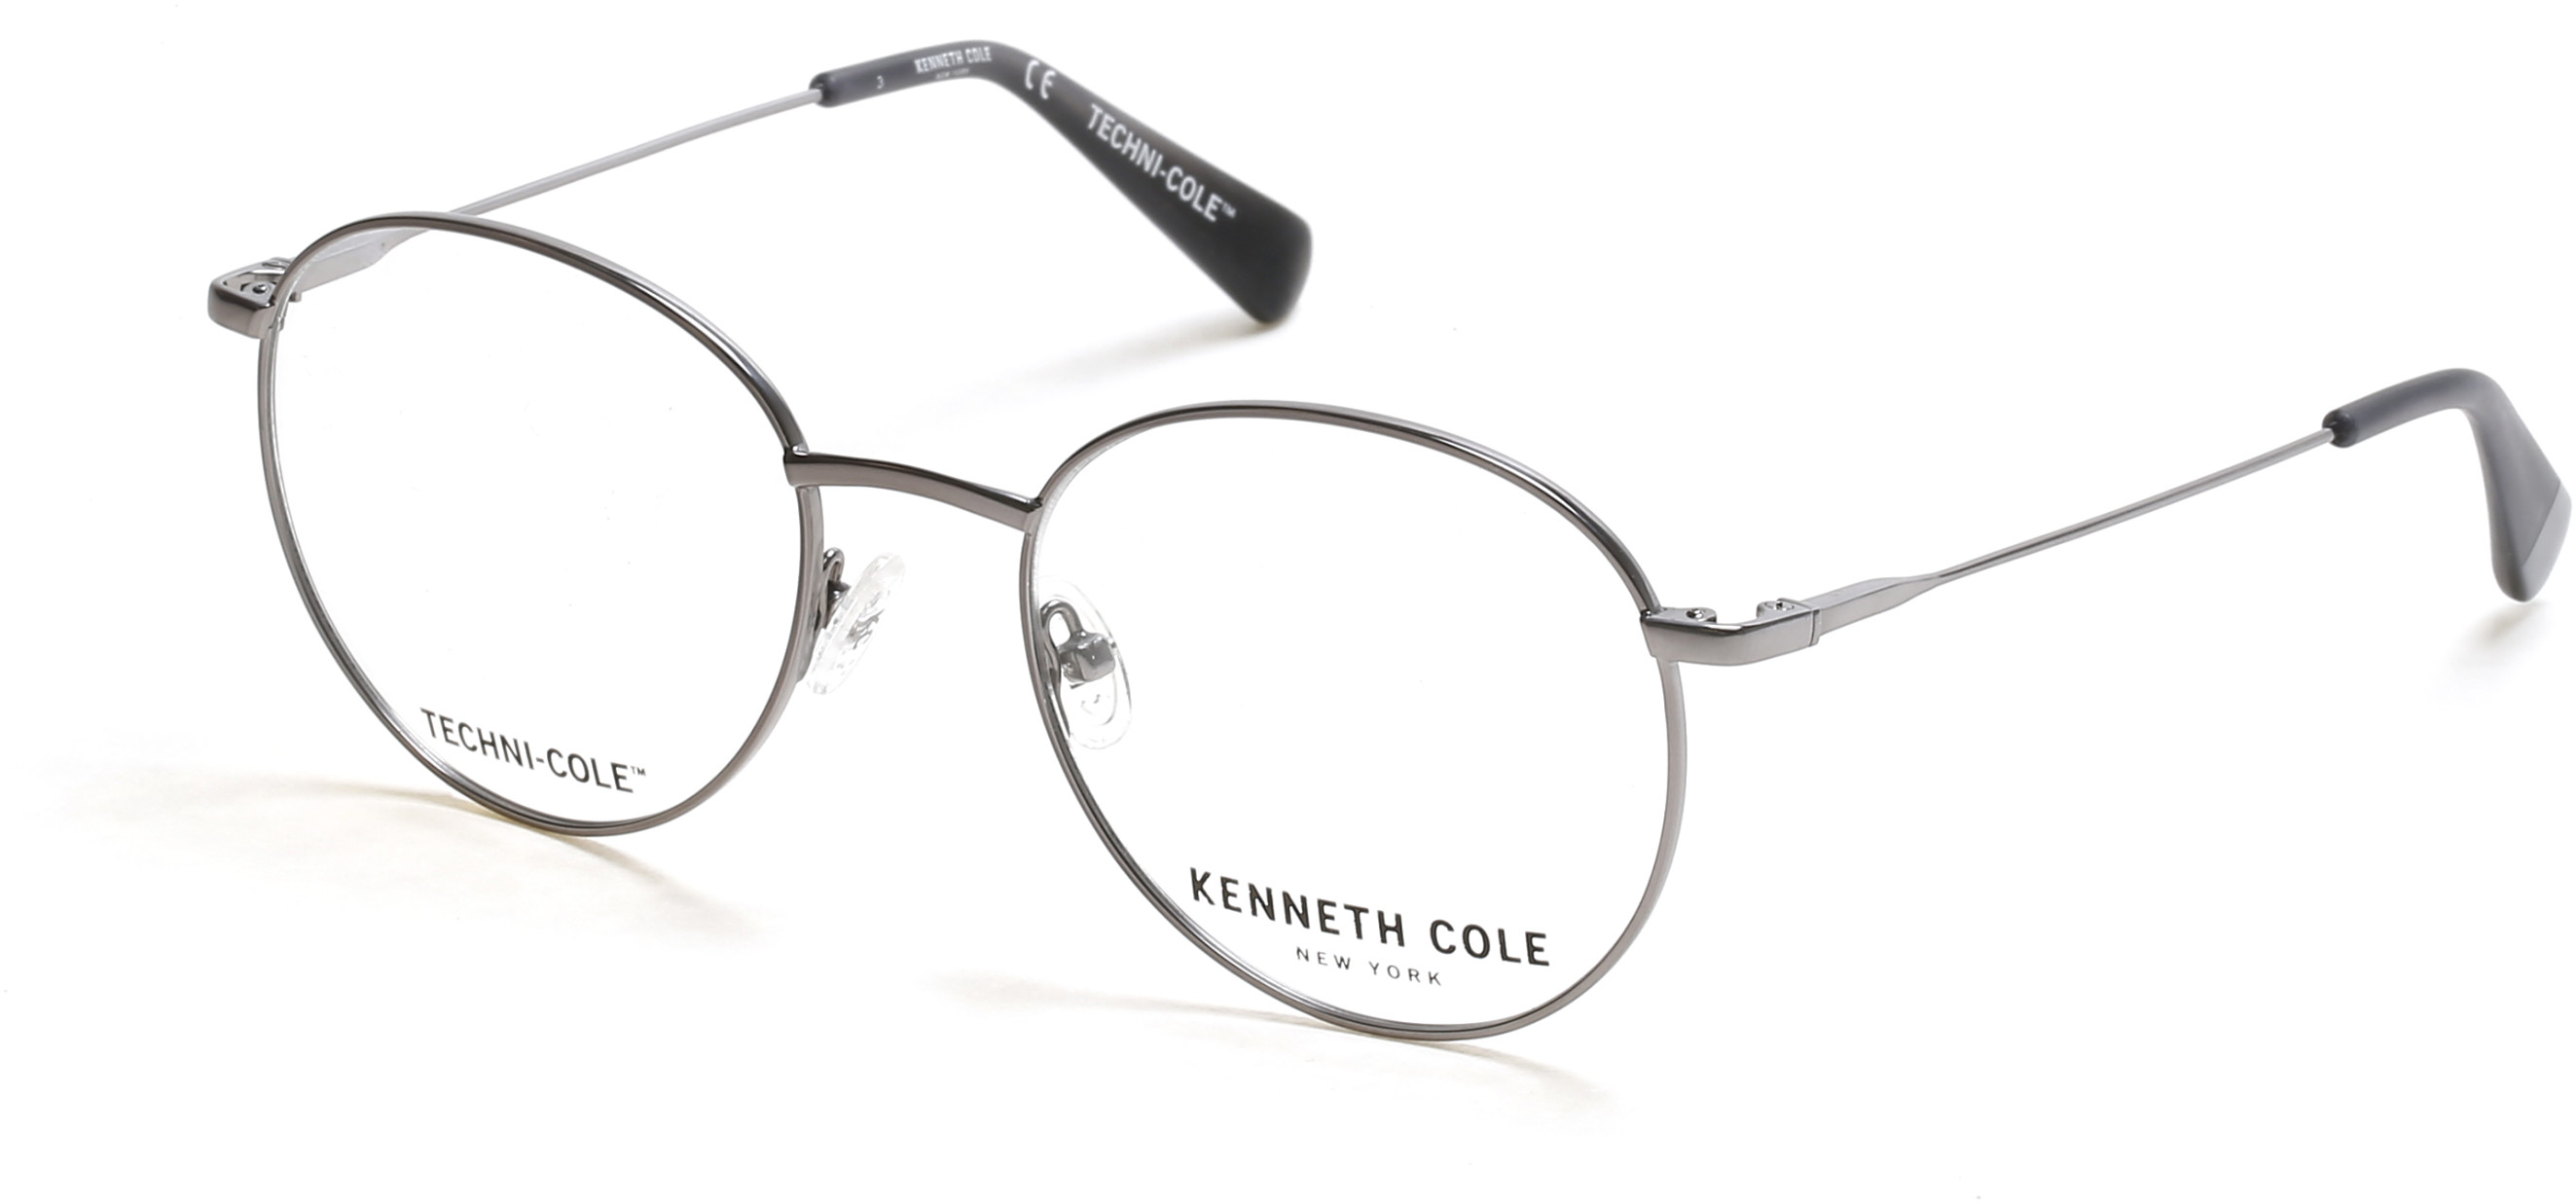 KENNETH COLE NY 0332